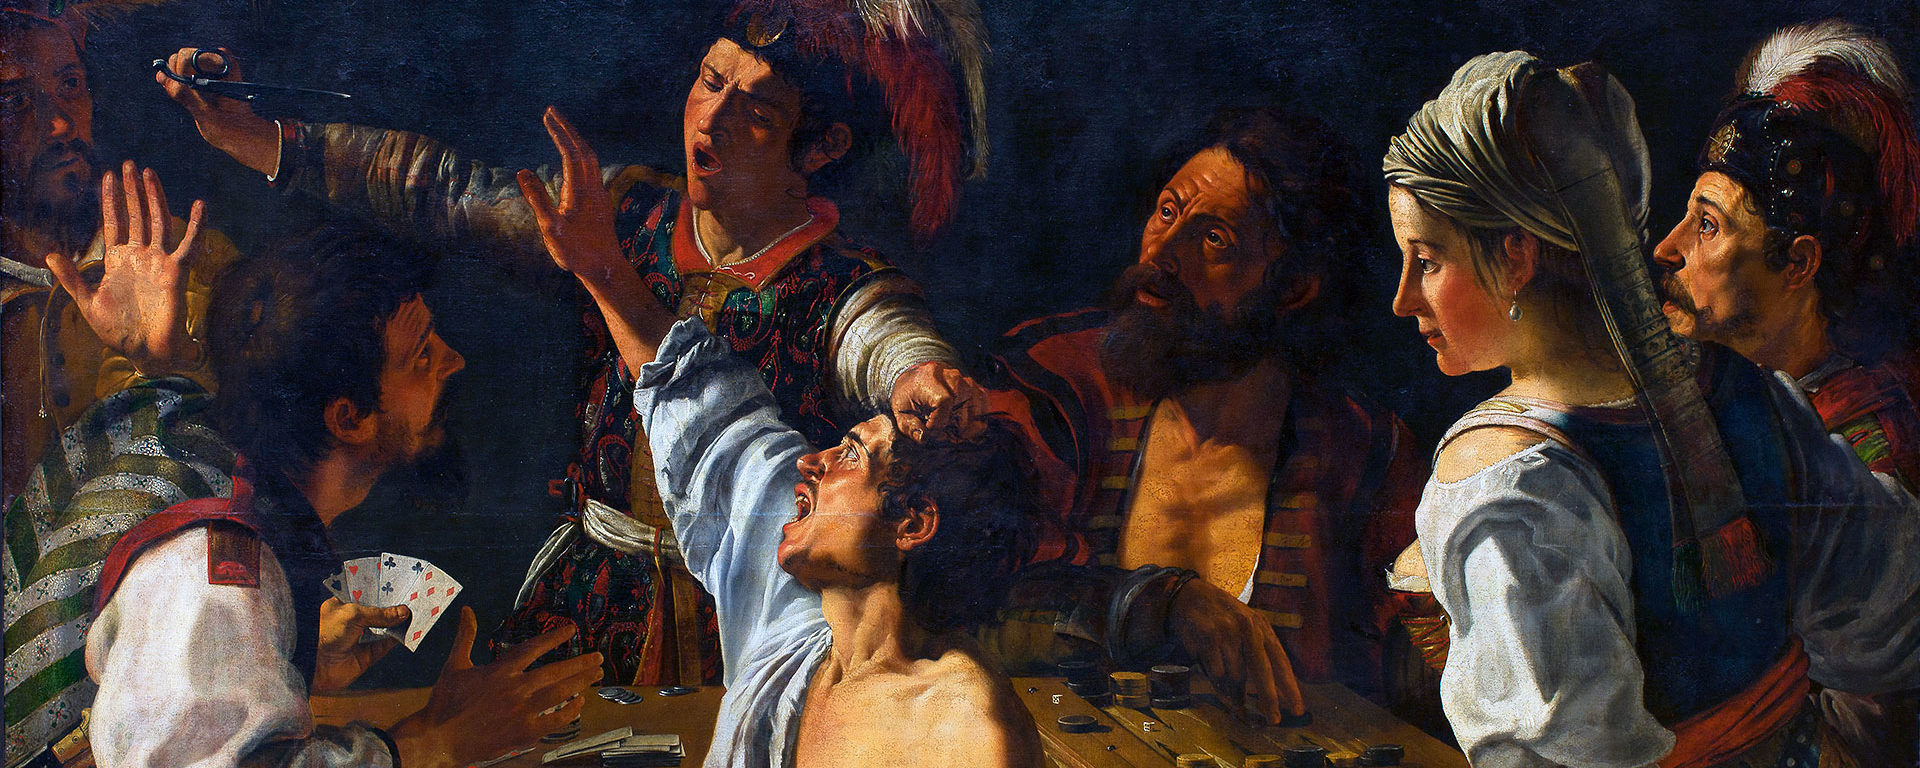 Theodoor Rombouts "Card and backgammon players. Fight over cards."